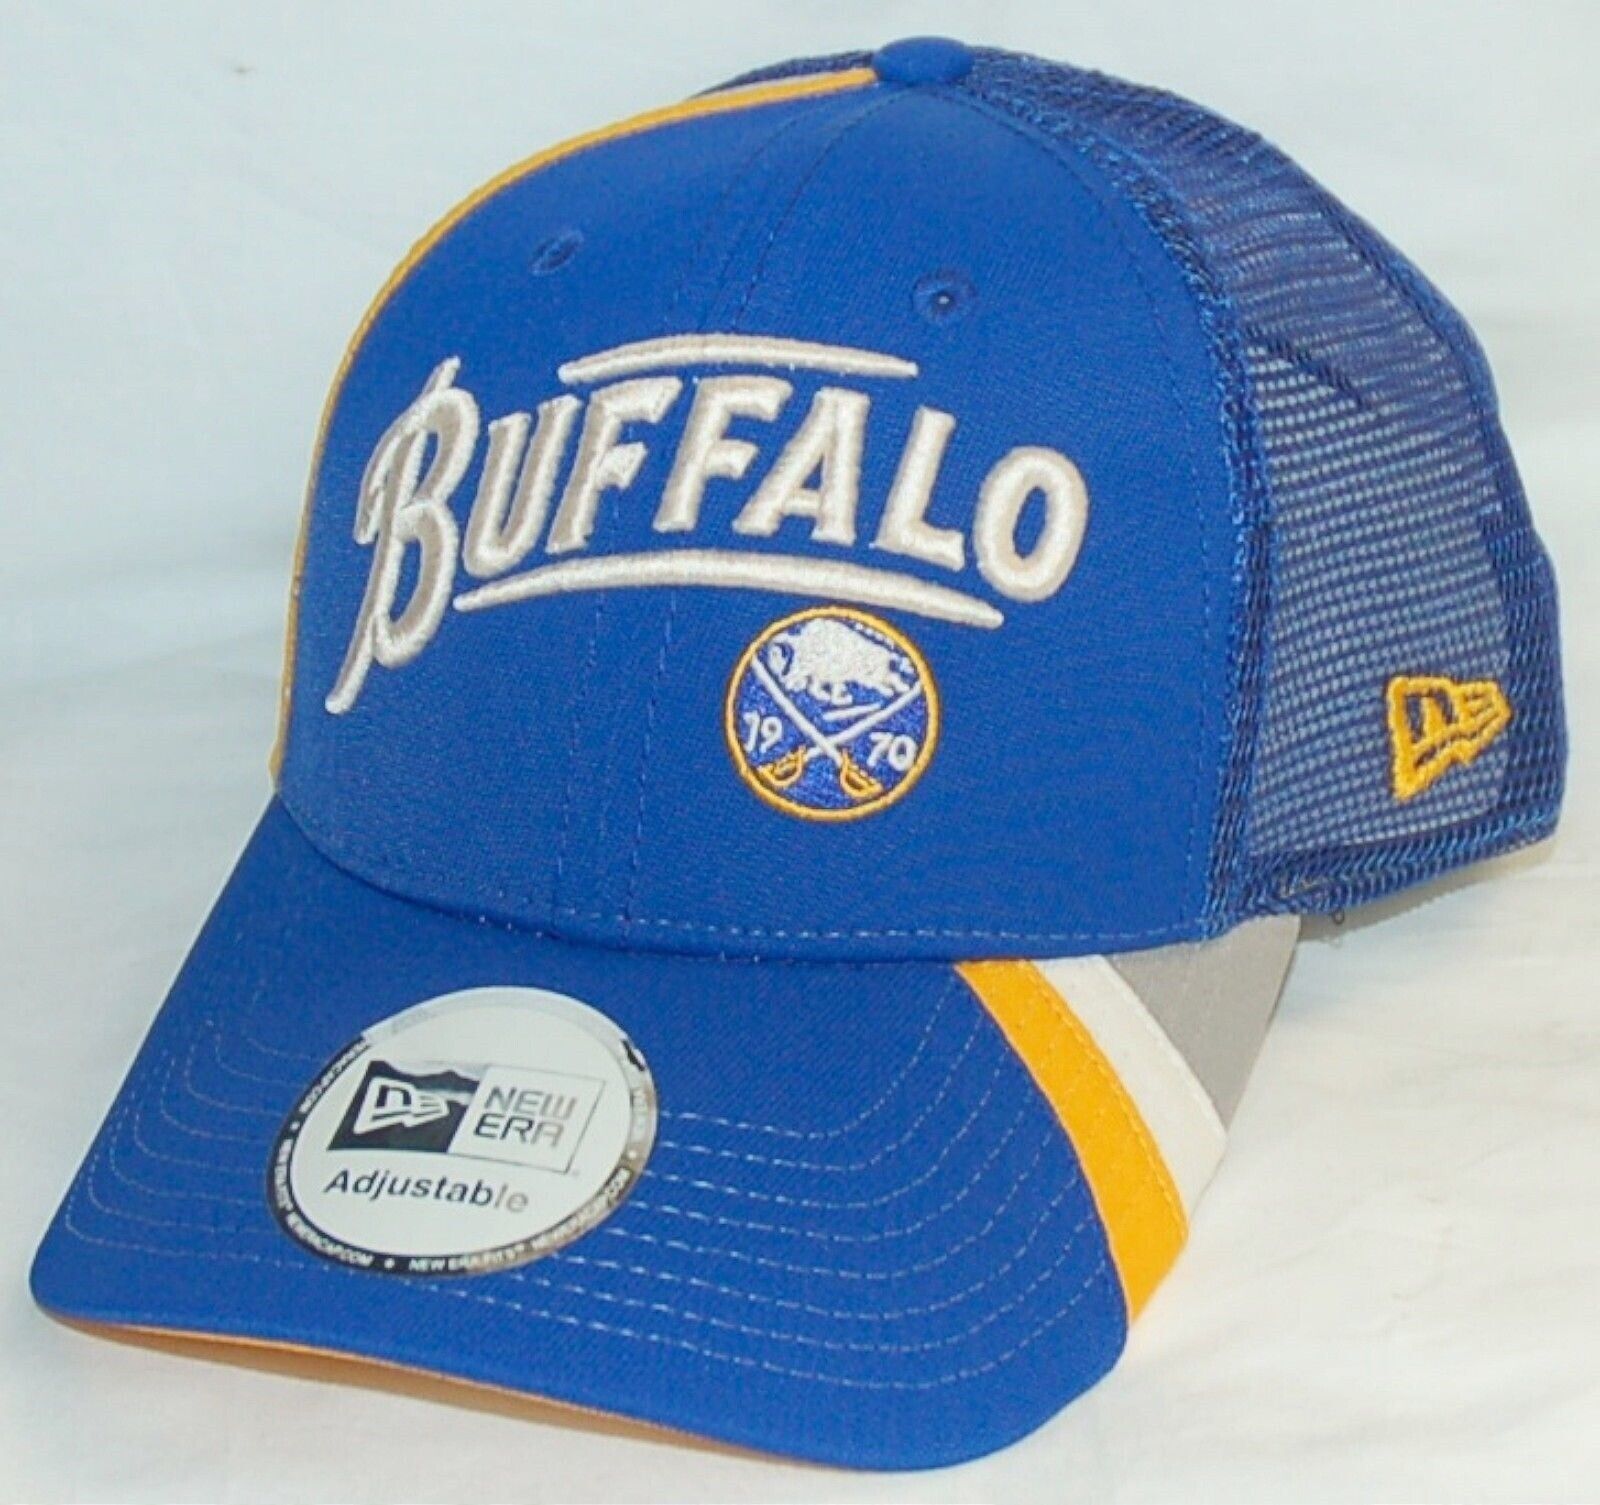 Primary image for NEW Era 59fifty BUFFALO SABRES Adjustable Snapback Hockey Hat BLUE & GOLD cap